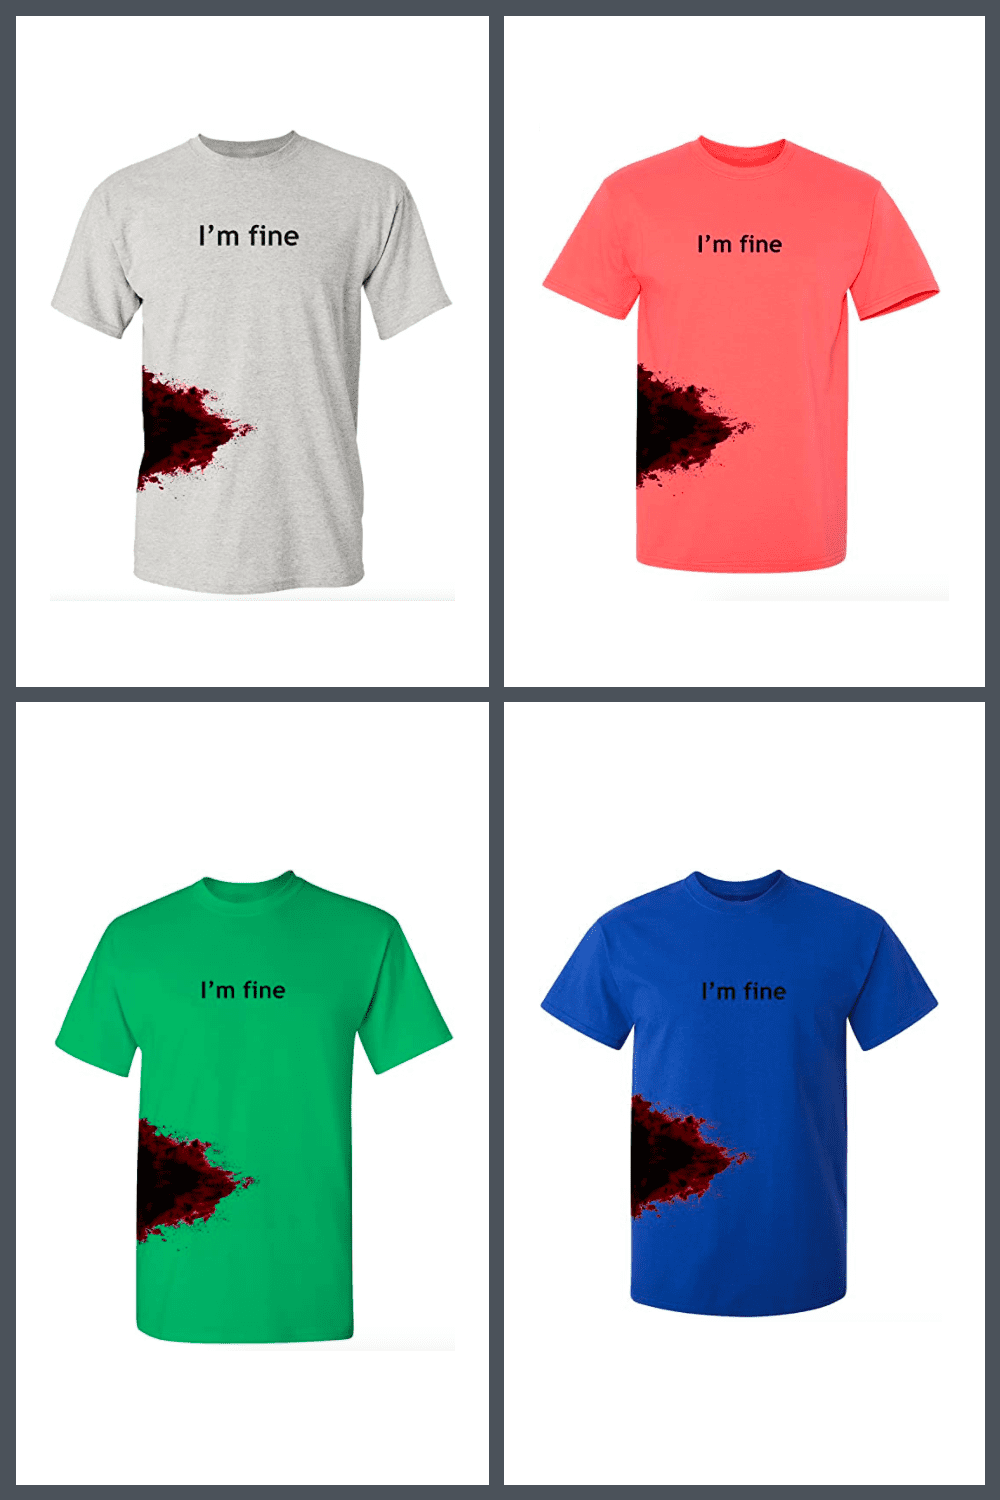 T-shirt with the image of a bloody side.